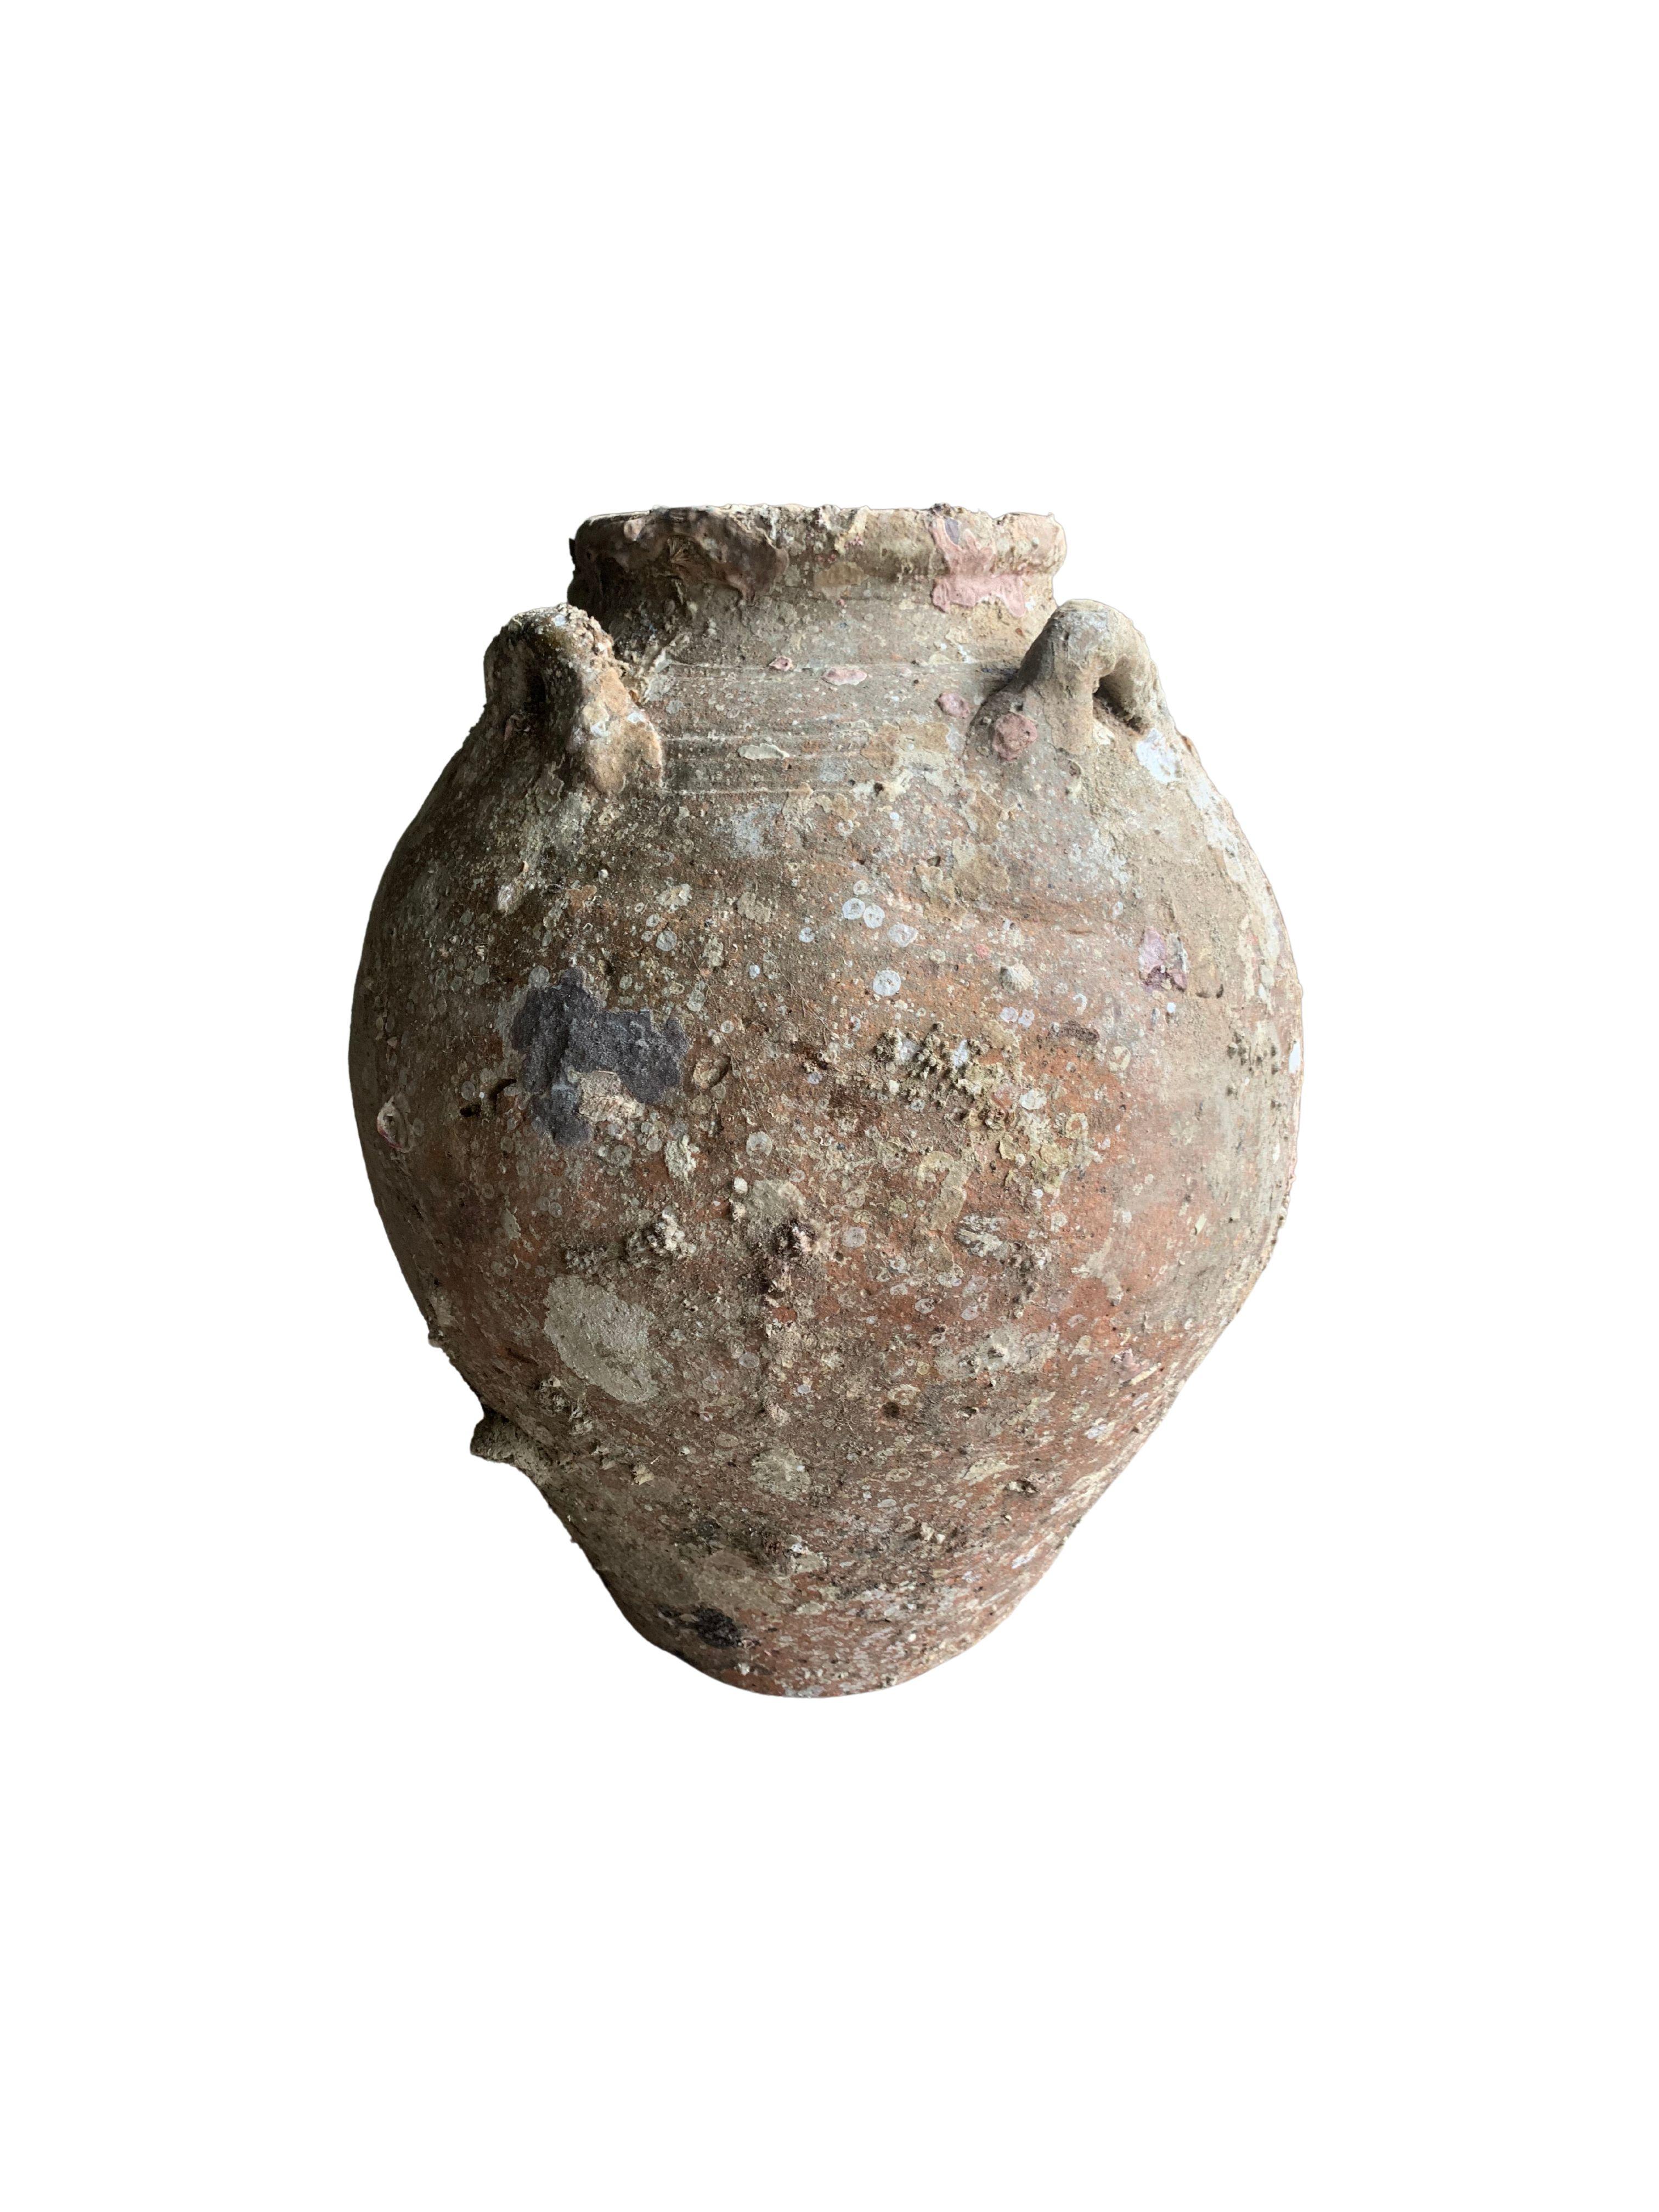 A wonderful example of a 19th Century Sawankhalok jar from a Shipwreck off the Coast of the Indonesian Island of Batam. Batam was one of the most substantial and influential ports in the South China Sea where an abundance of trade was conducted.